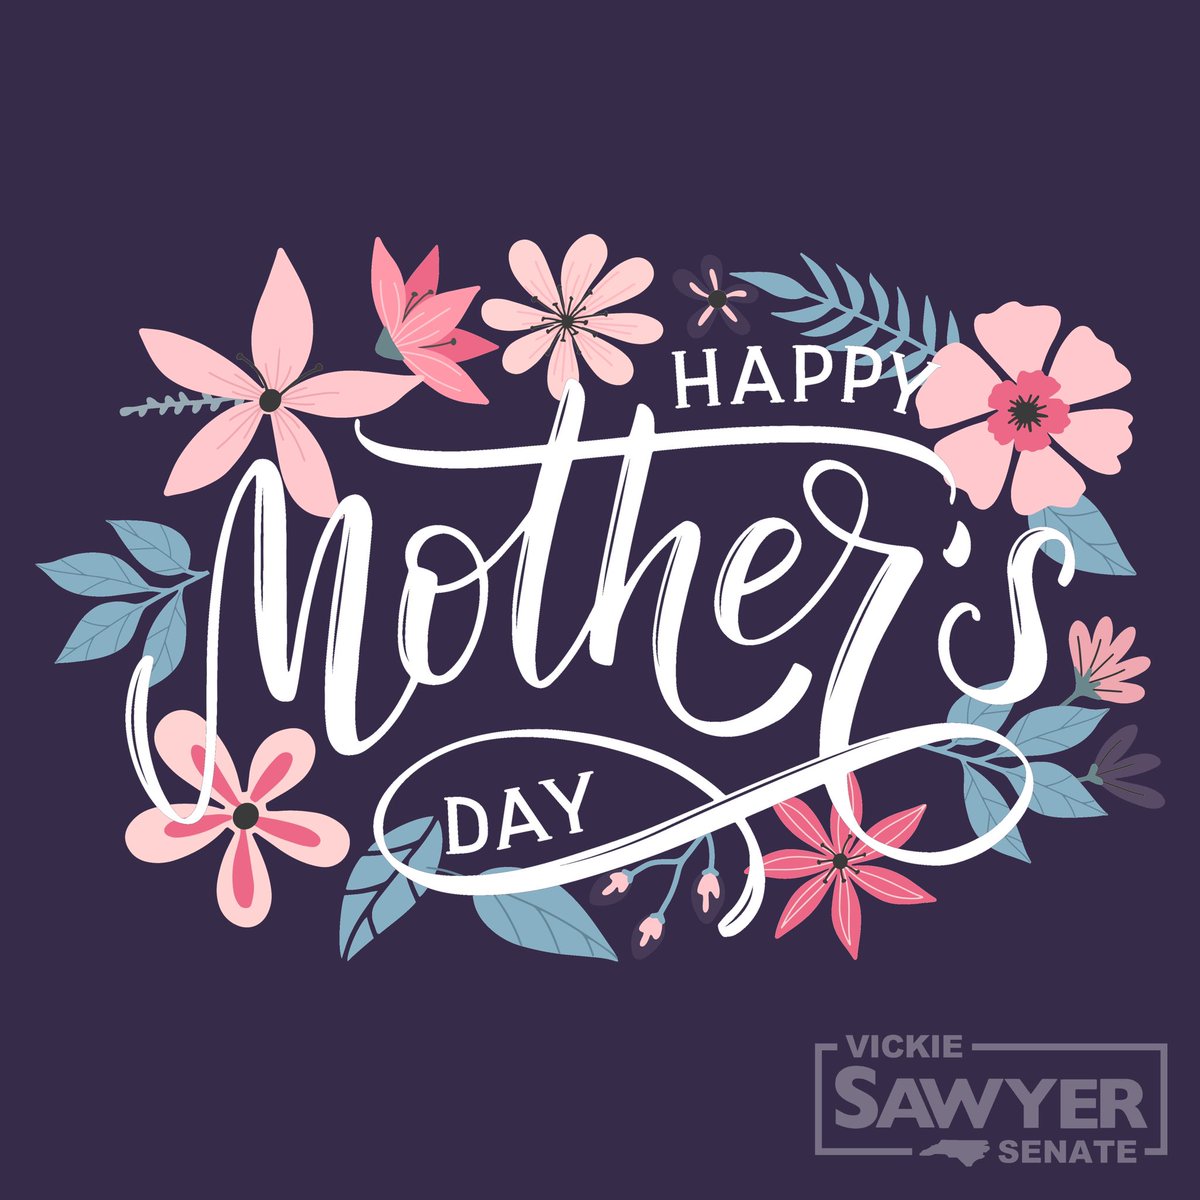 Sending love and appreciation to all the extraordinary moms out there. Your boundless love, unwavering strength, and endless sacrifices are the pillars of our families and our communities. Thank you, and Happy Mother’s Day!